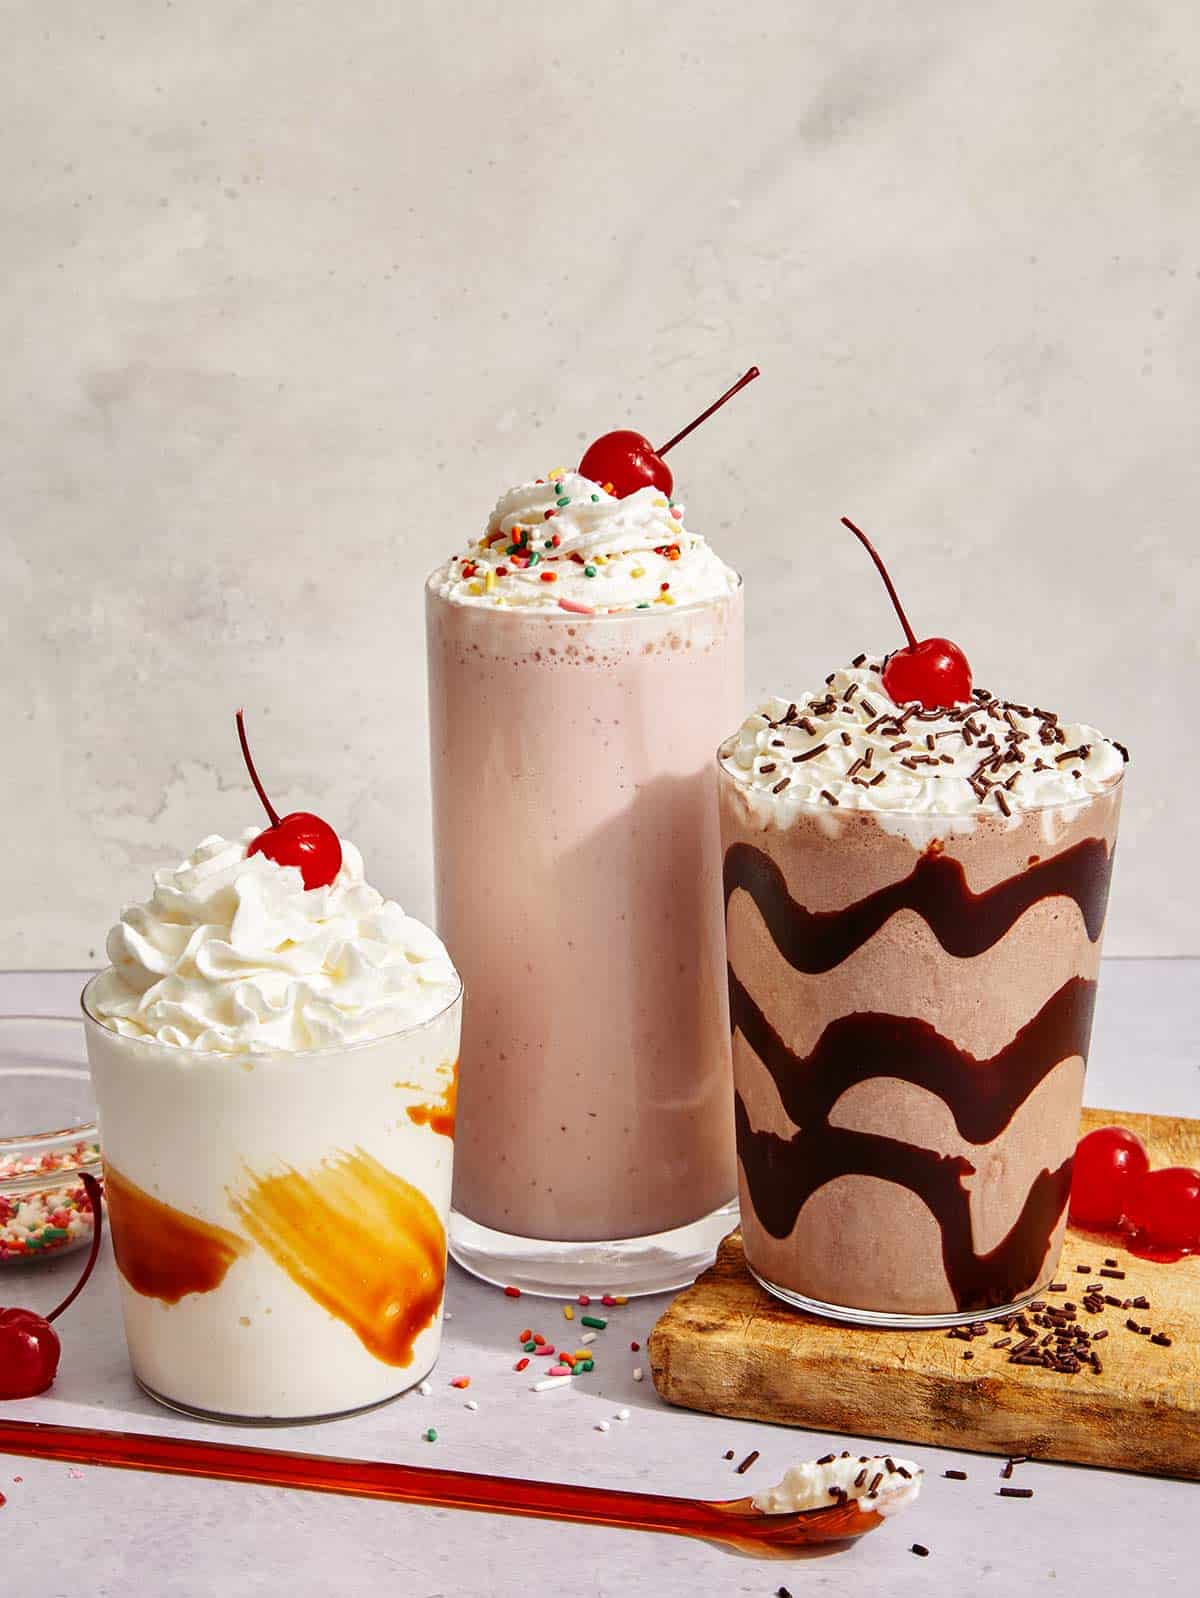 Milkshakes made from the same base recipe in different flavors. 